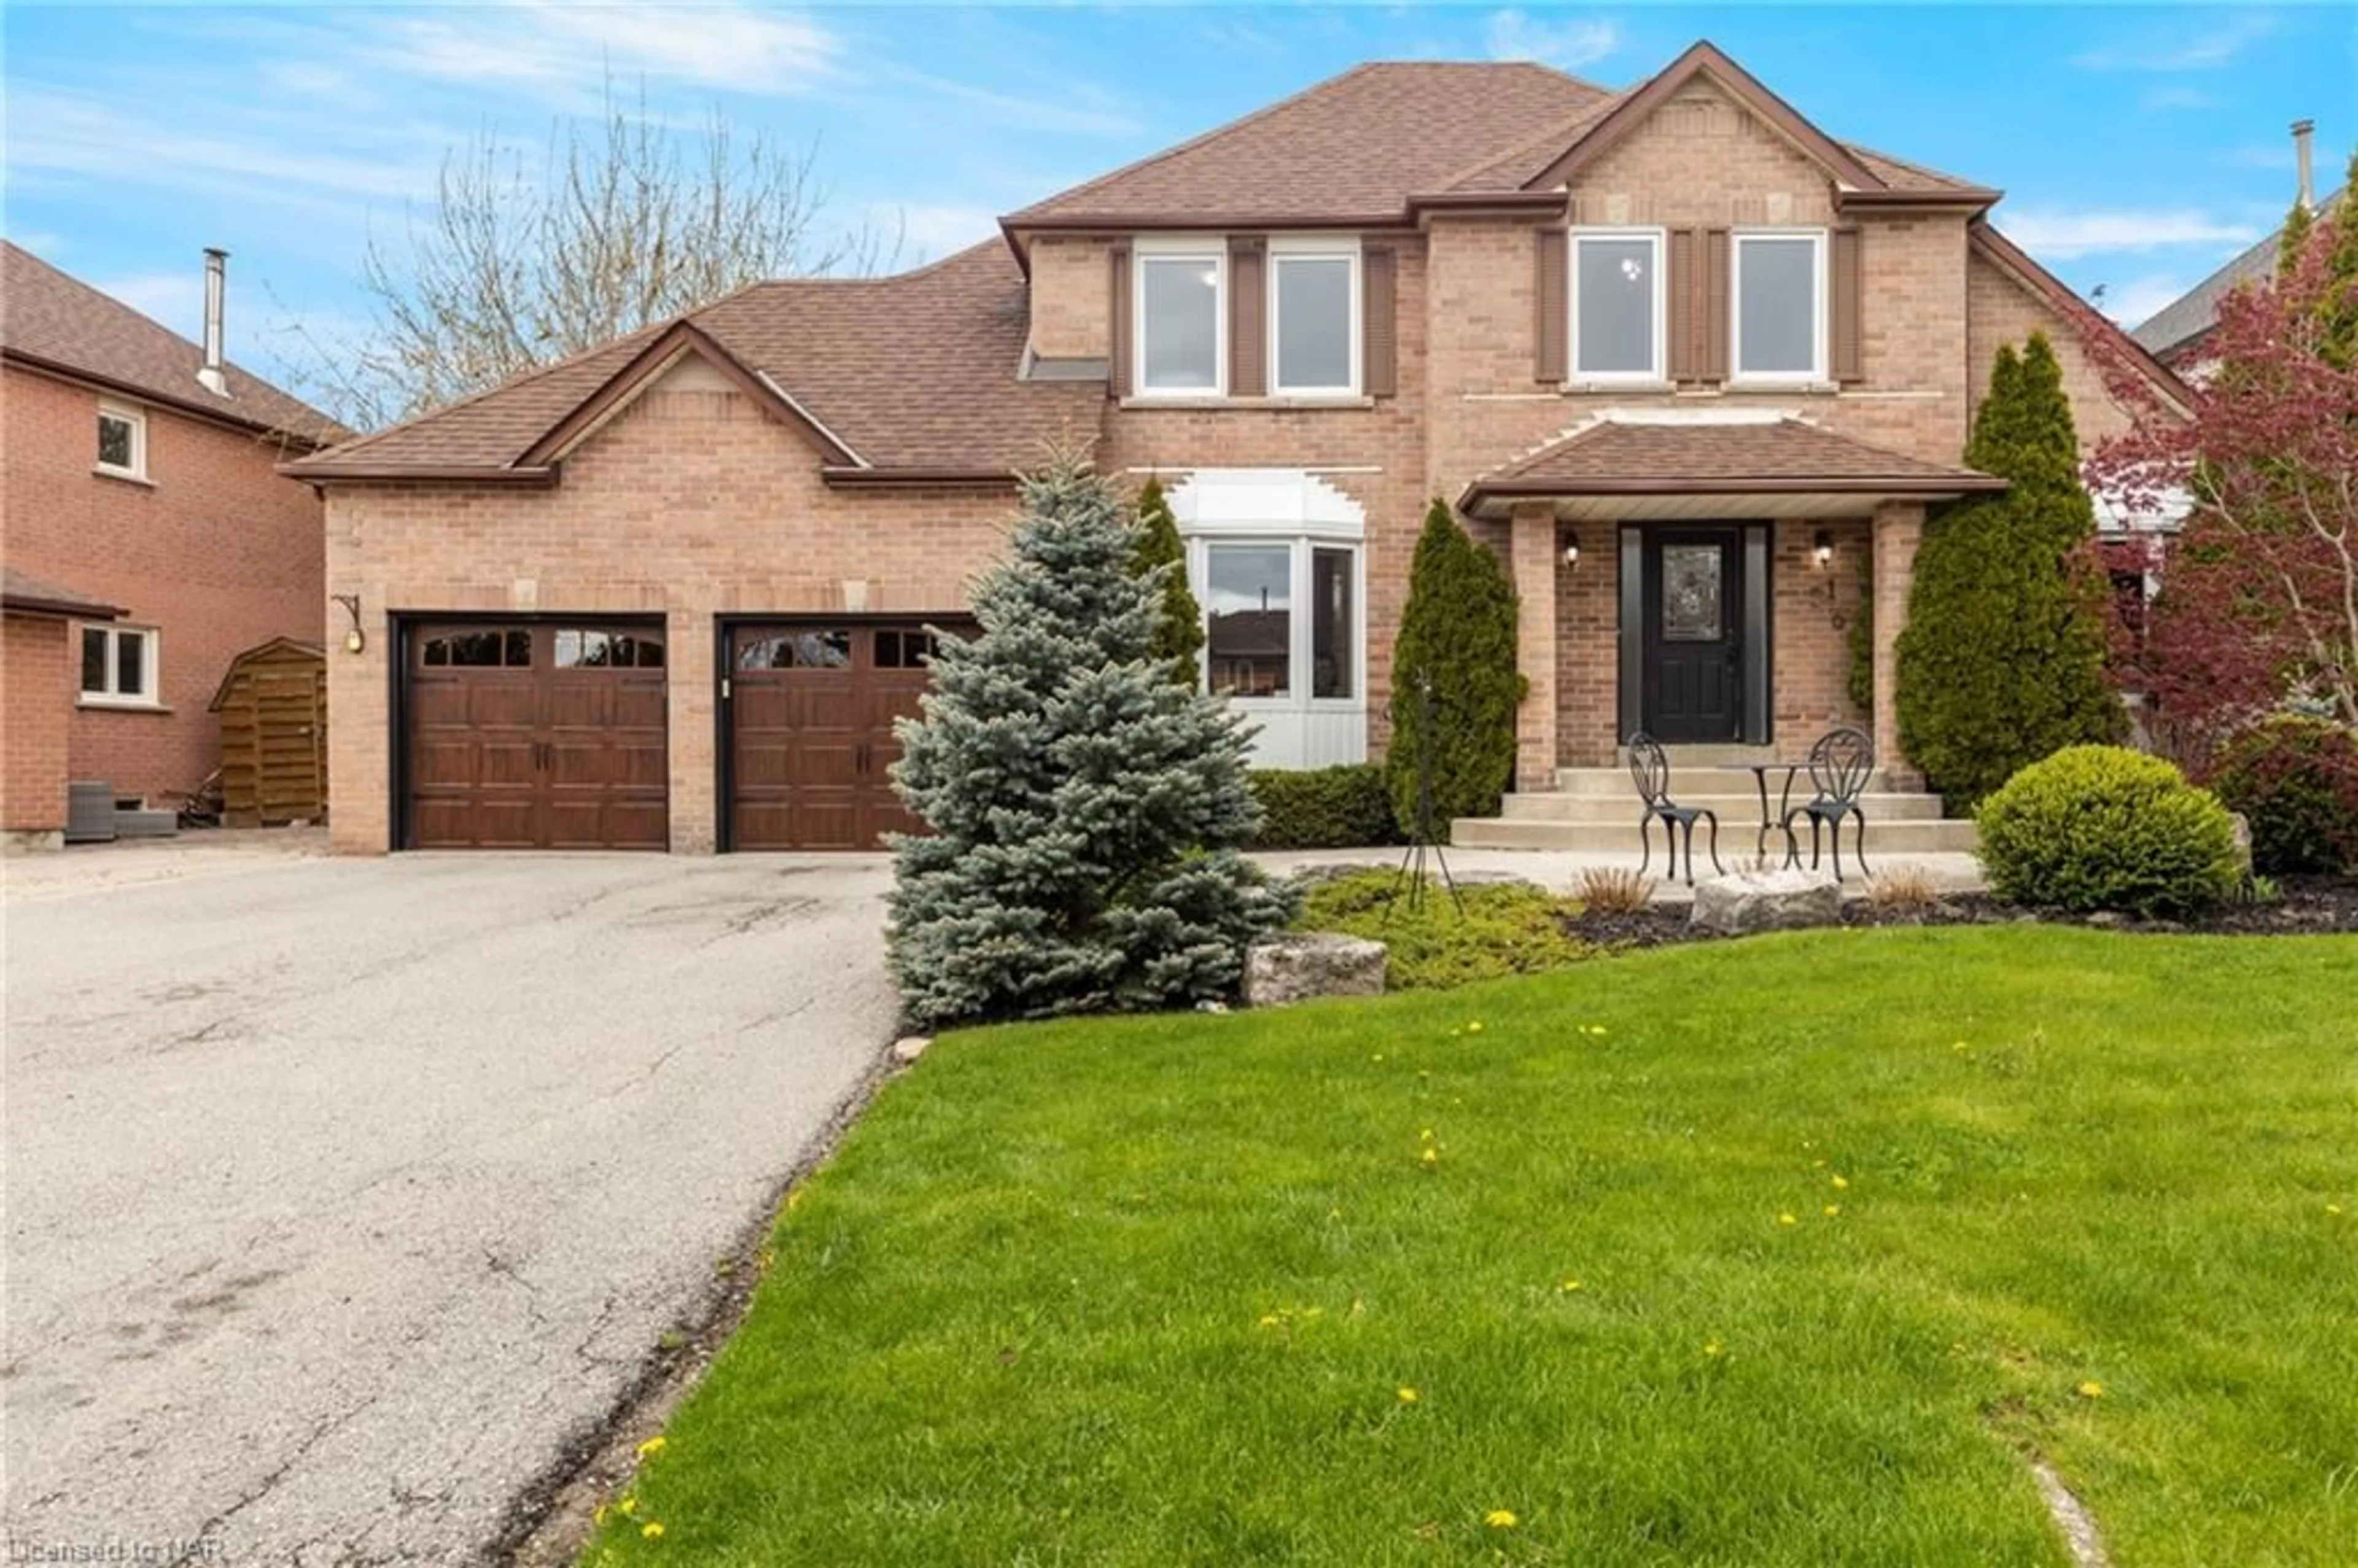 Home with brick exterior material for 31 Bloomfield Trail, Richmond Ontario L4E 2J8